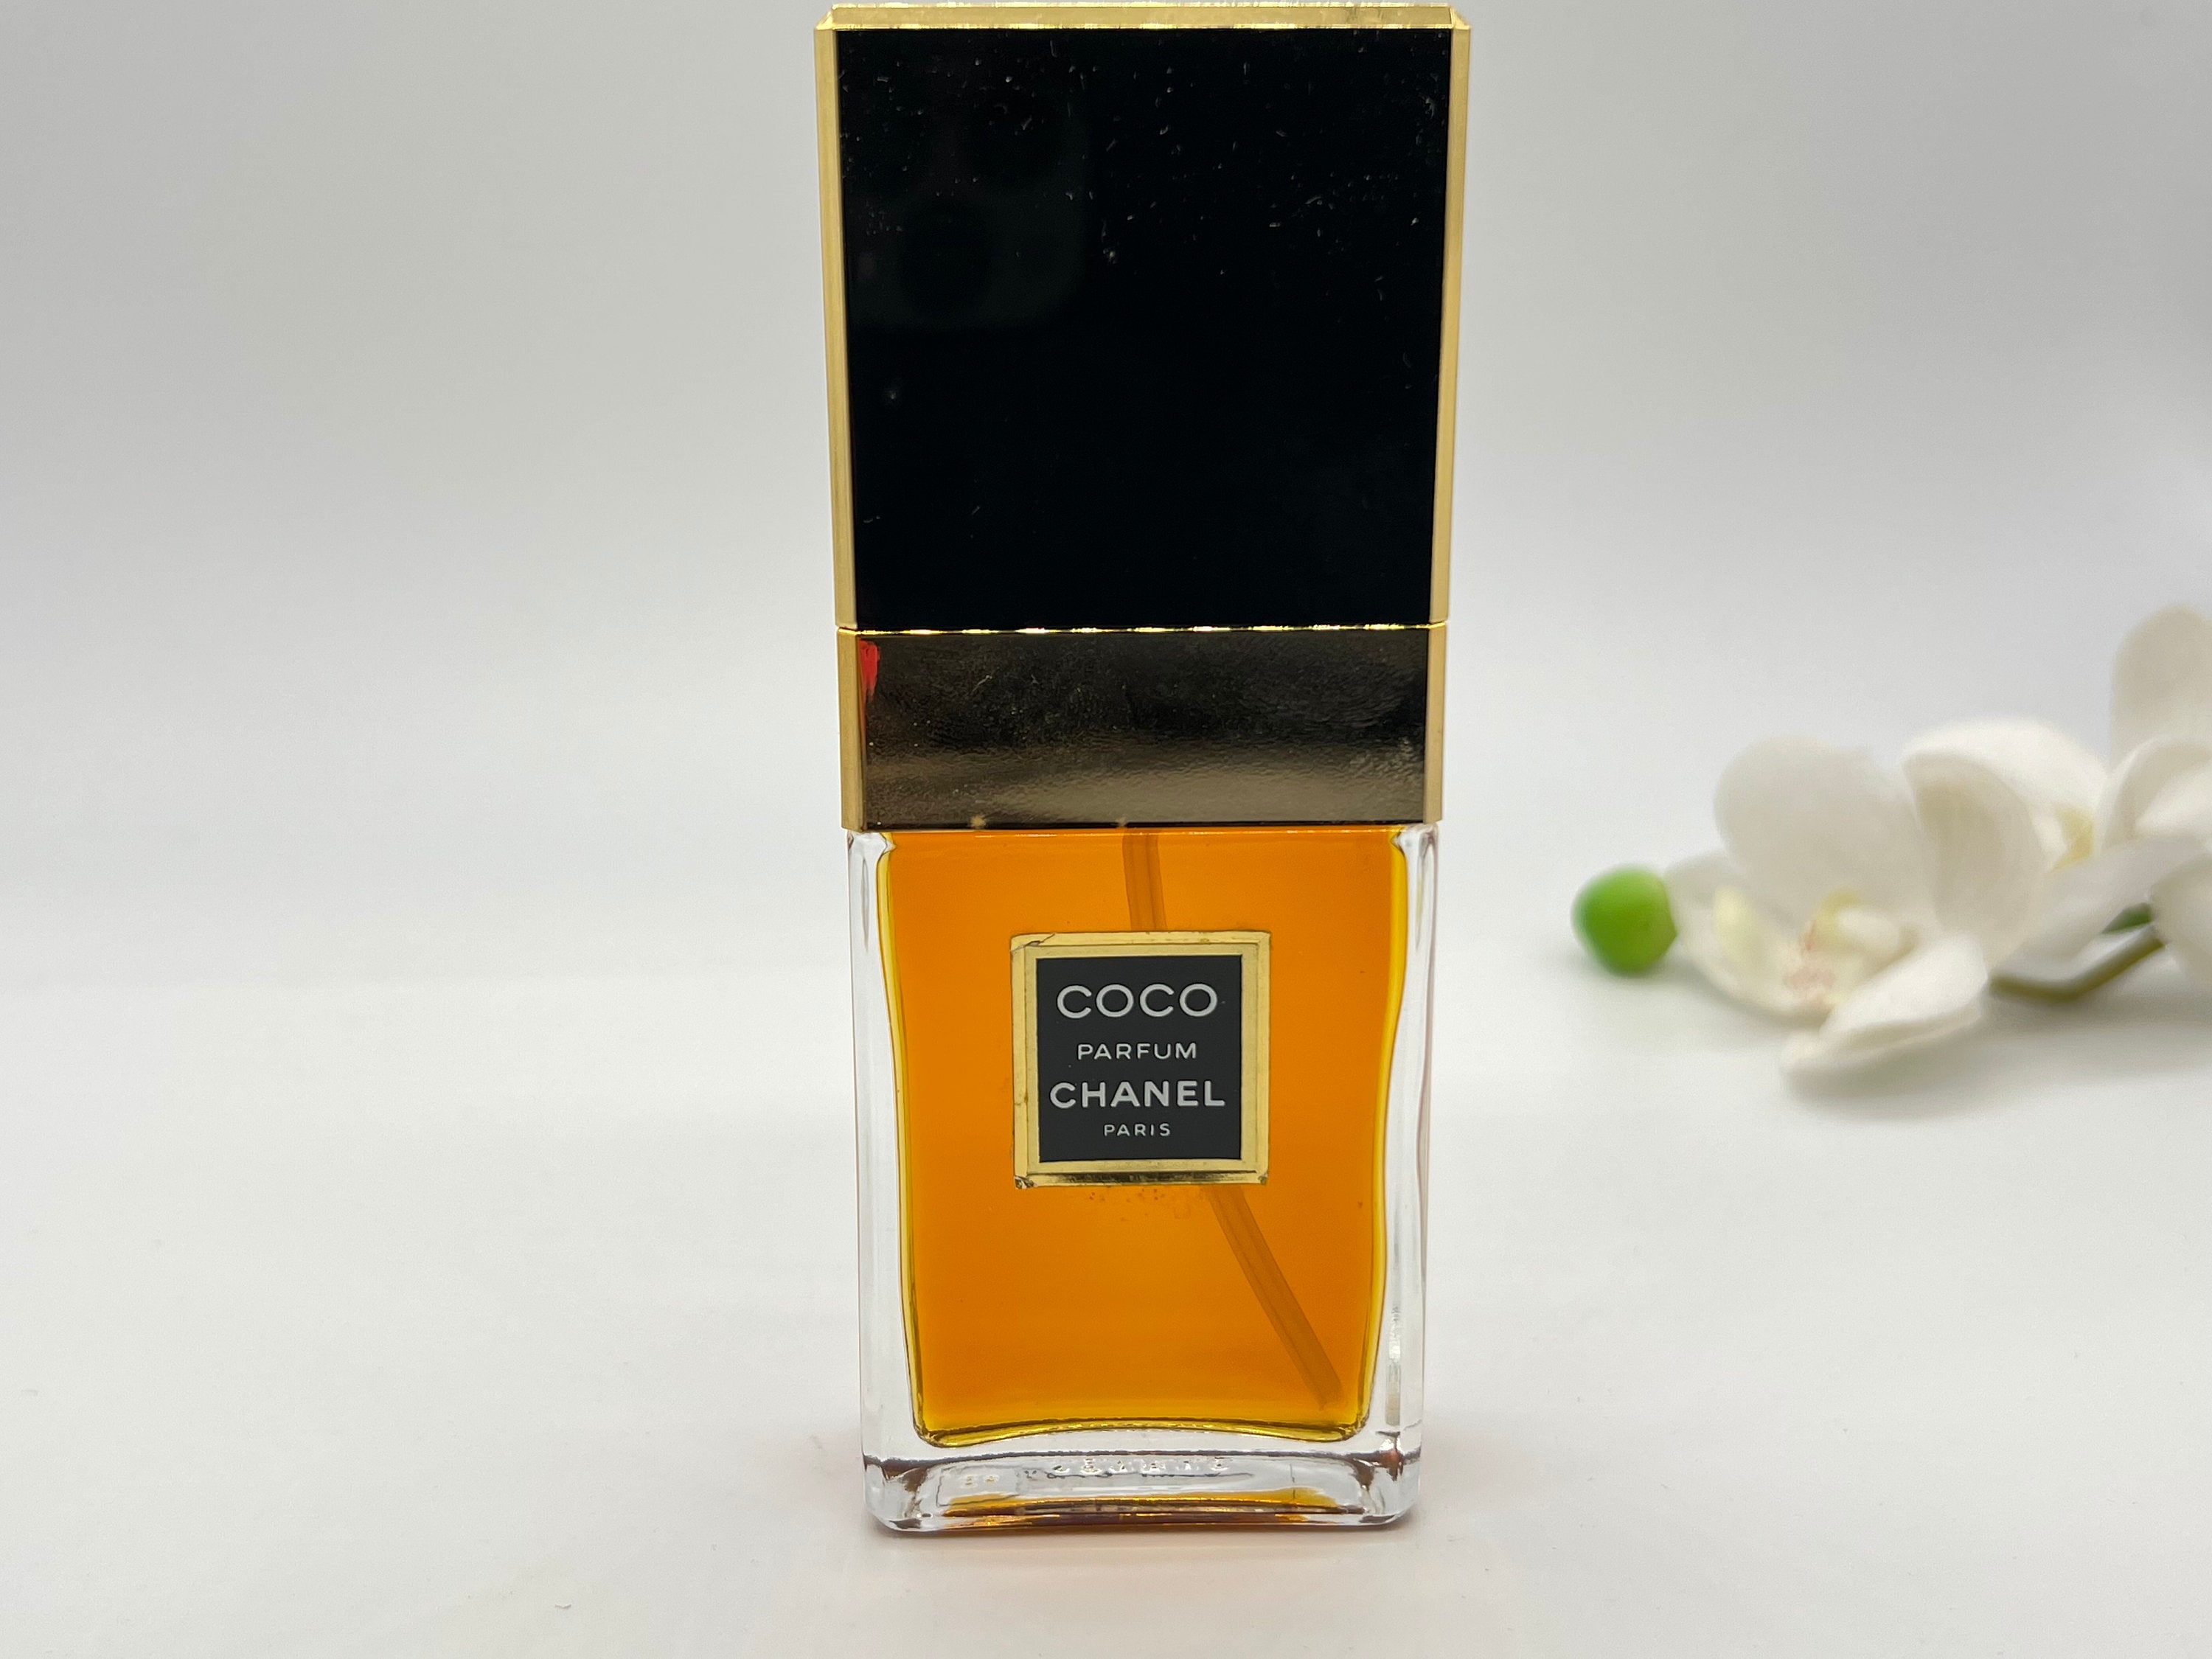 OLD-TIME] Early second-hand CHANEL perfume 35ml (sold on the